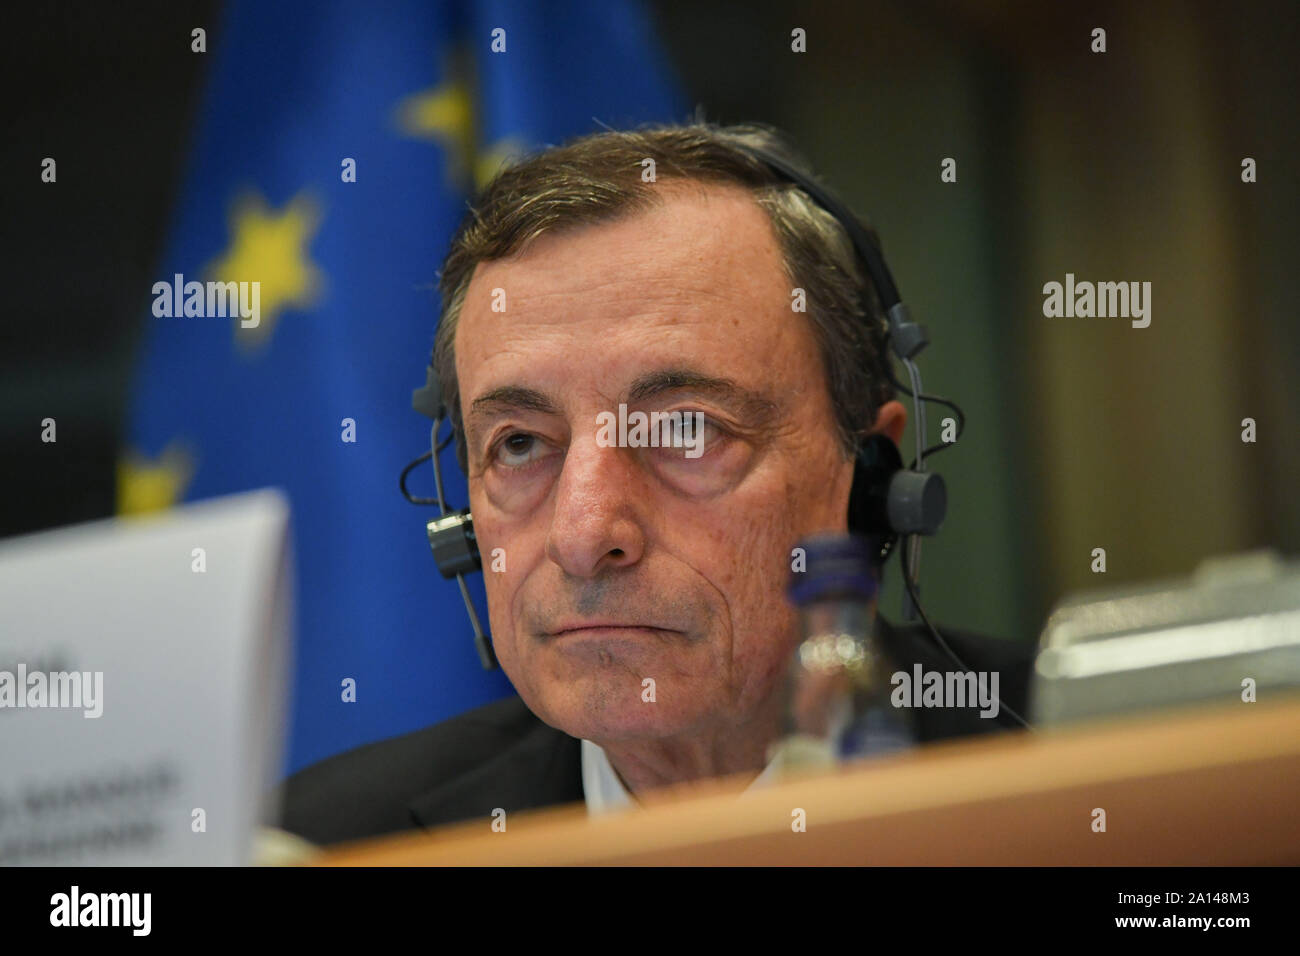 Brussels, Belgium. 23rd Sep, 2019. Mario Draghi, President of the European Central Bank (ECB), attends the Monetary Dialogue of the European Parliament's Economic and Monetary Affairs Committee in Brussels, Belgium, Sept. 23, 2019. Credit: Riccardo Pareggiani/Xinhua Stock Photo